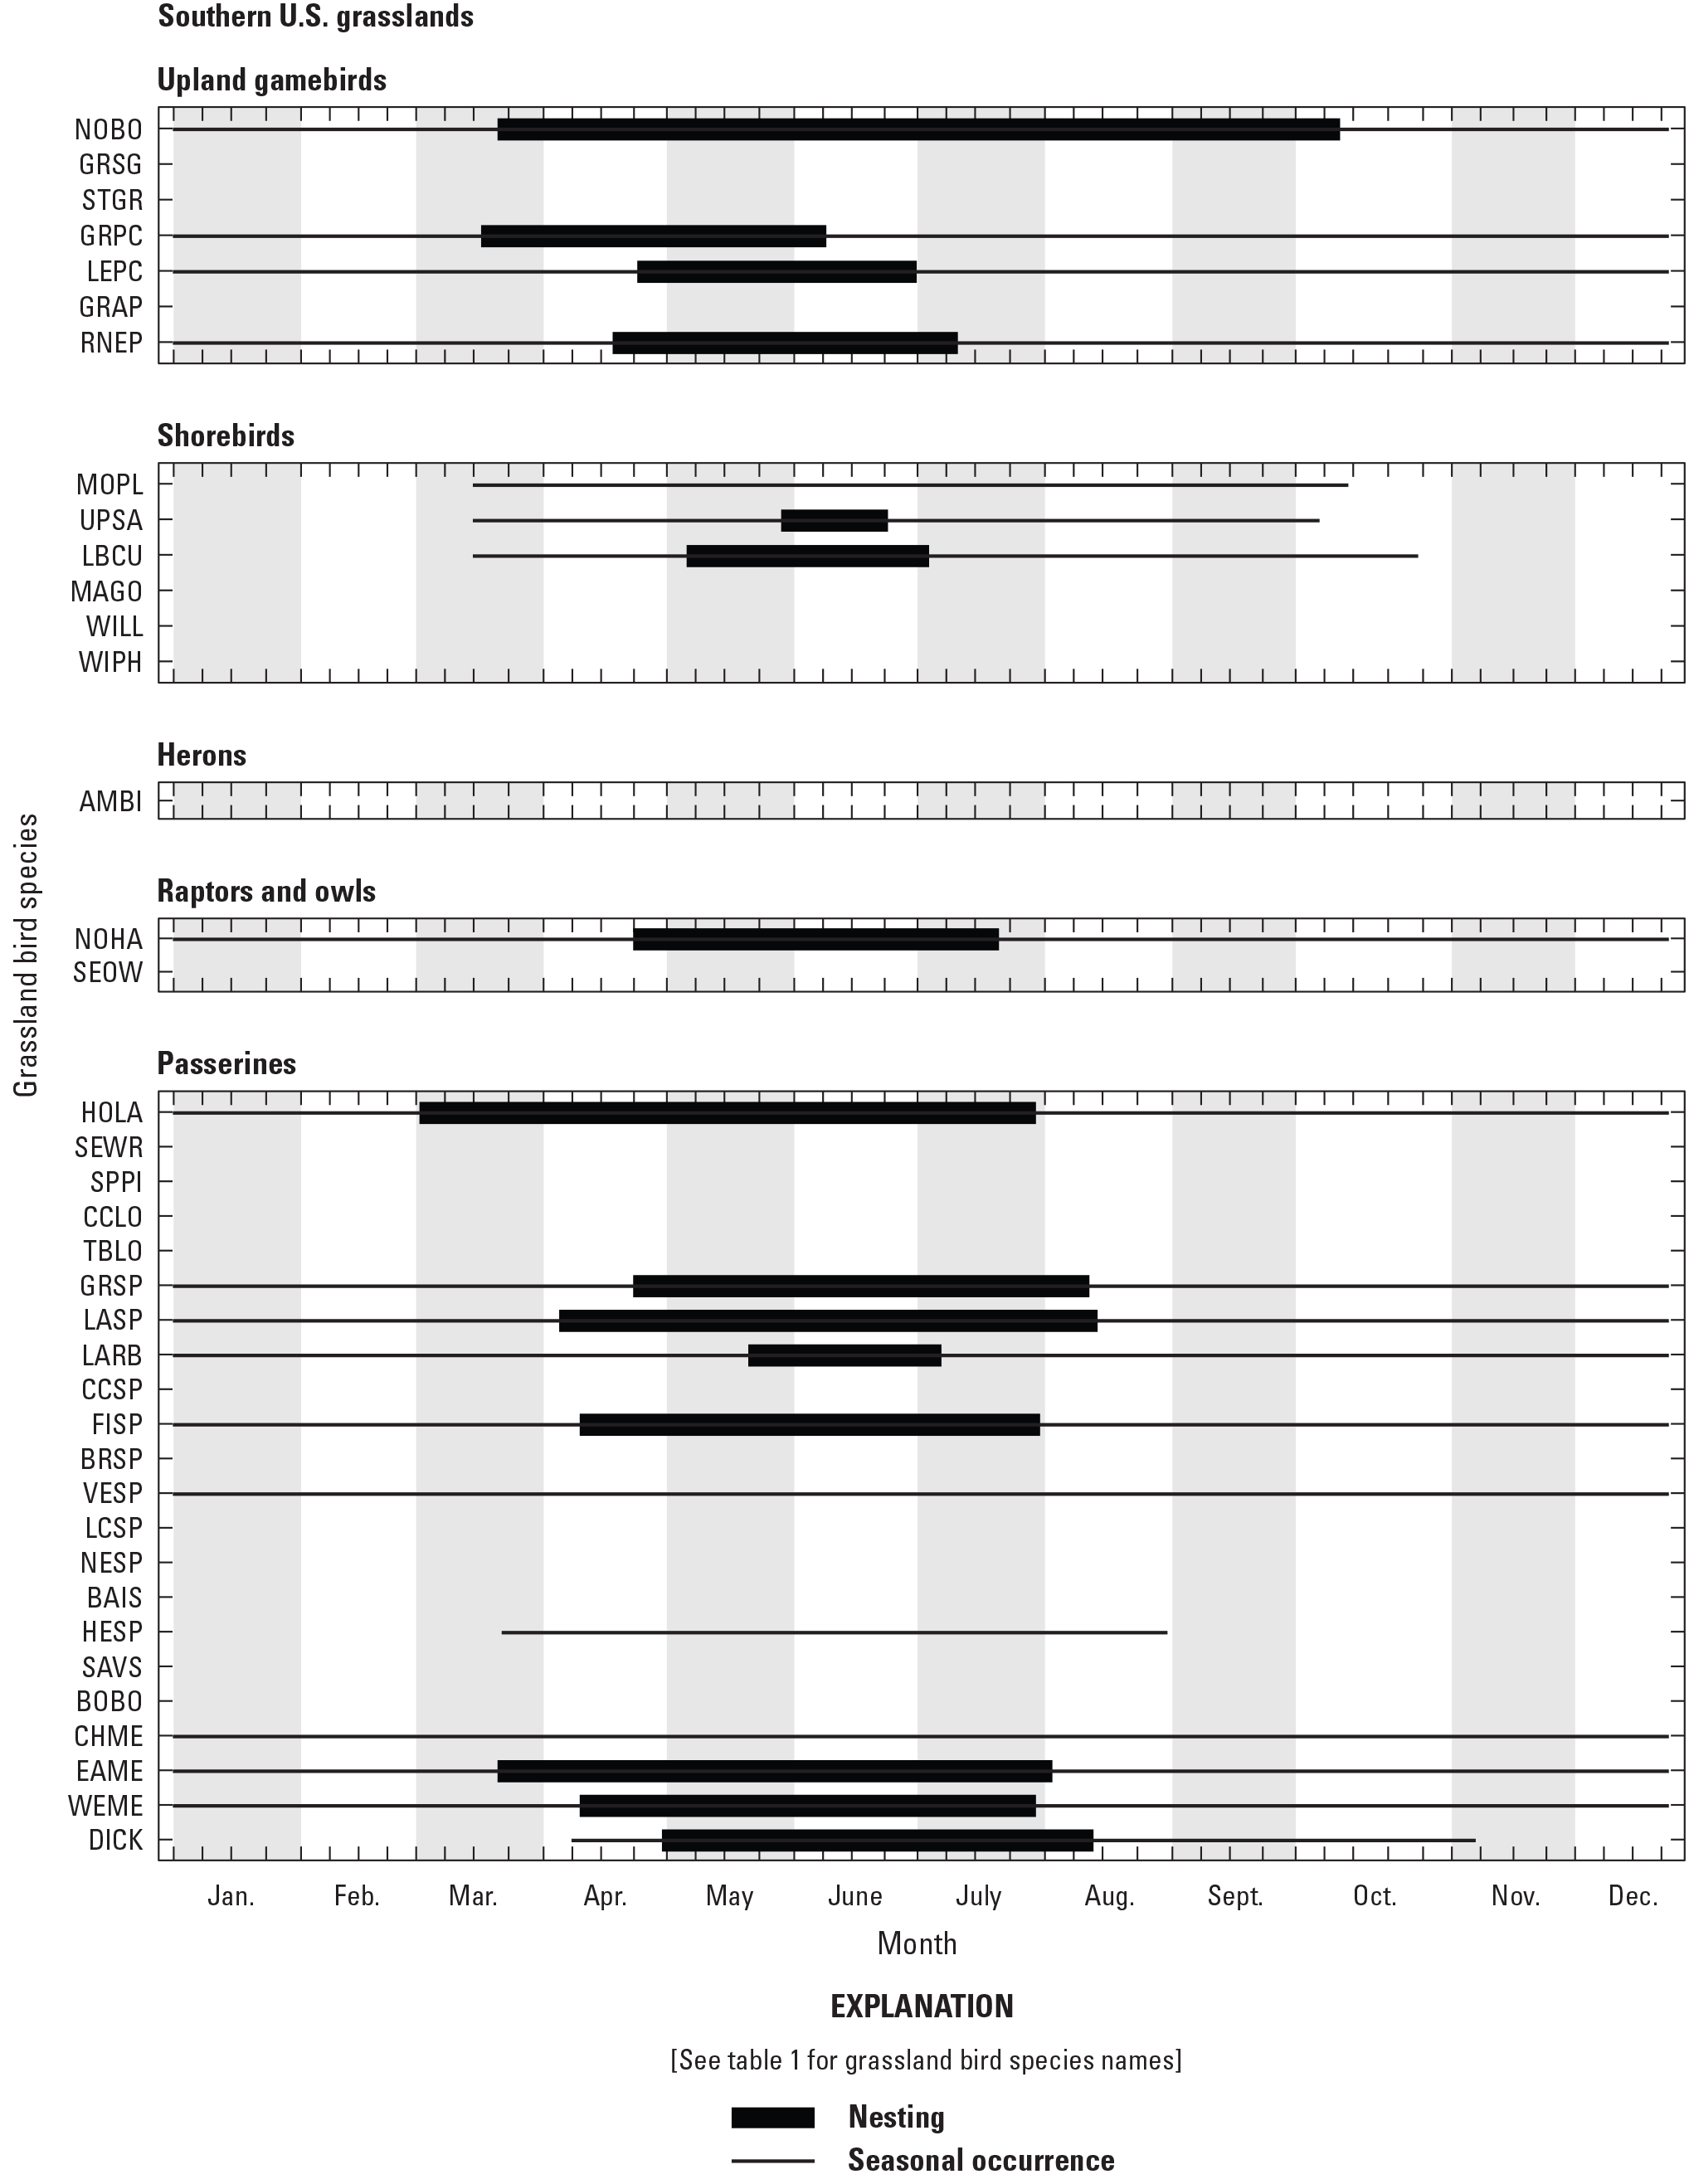 Figure showing seasonal occurrence and nesting phenology for 38 grassland bird species
                     in the southern U.S. grasslands.